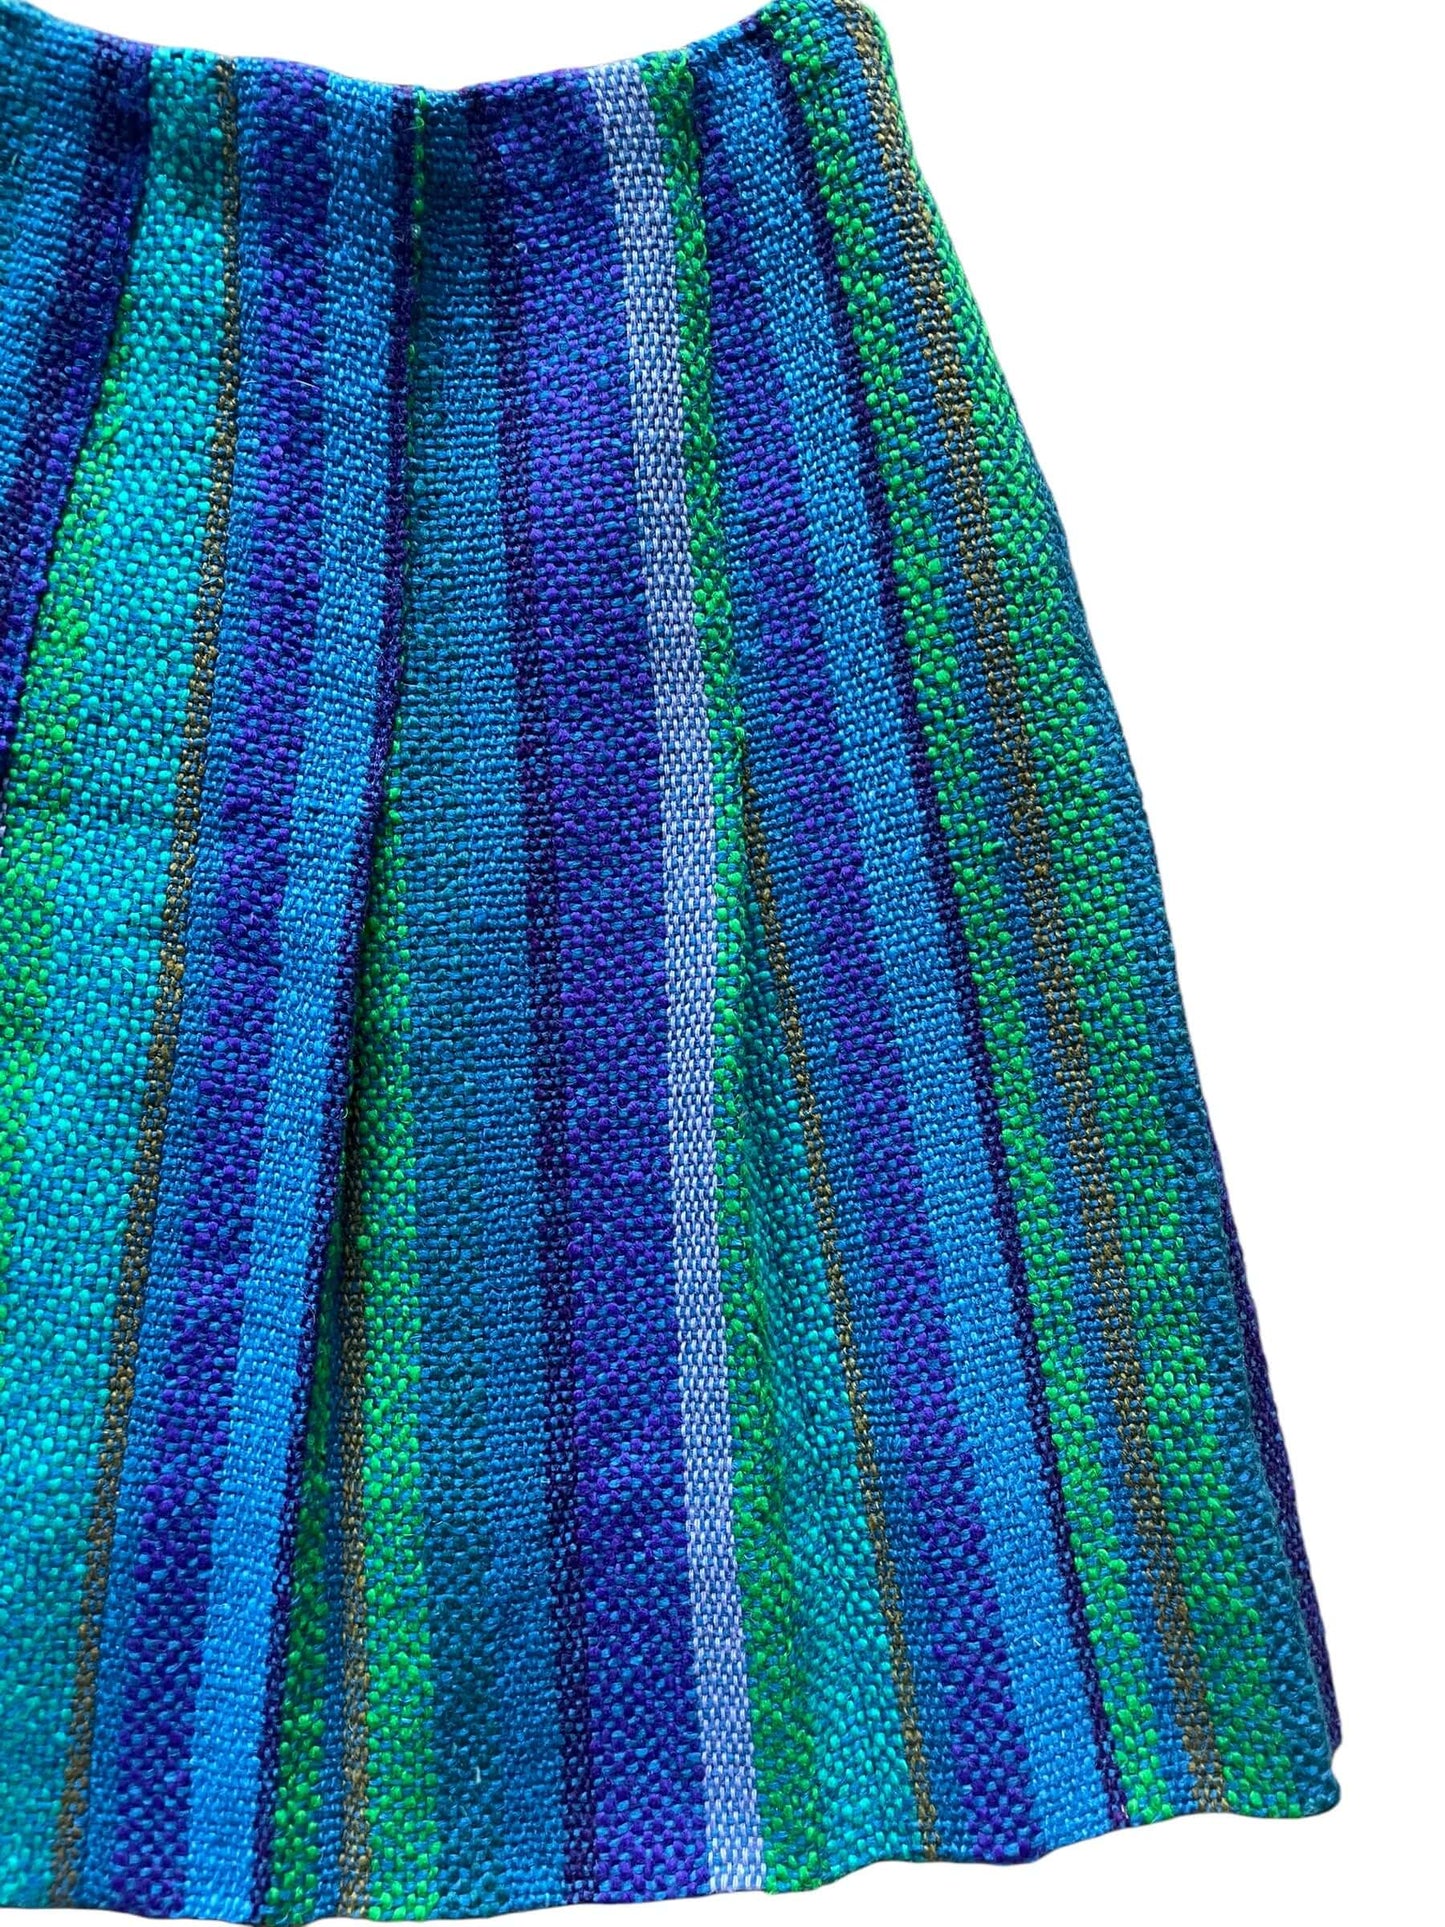 Front left side view of Vintage 1960s Woven Skirt | Seattle True Ladies Vintage | Barn Owl Vintage Skirts and Dresses